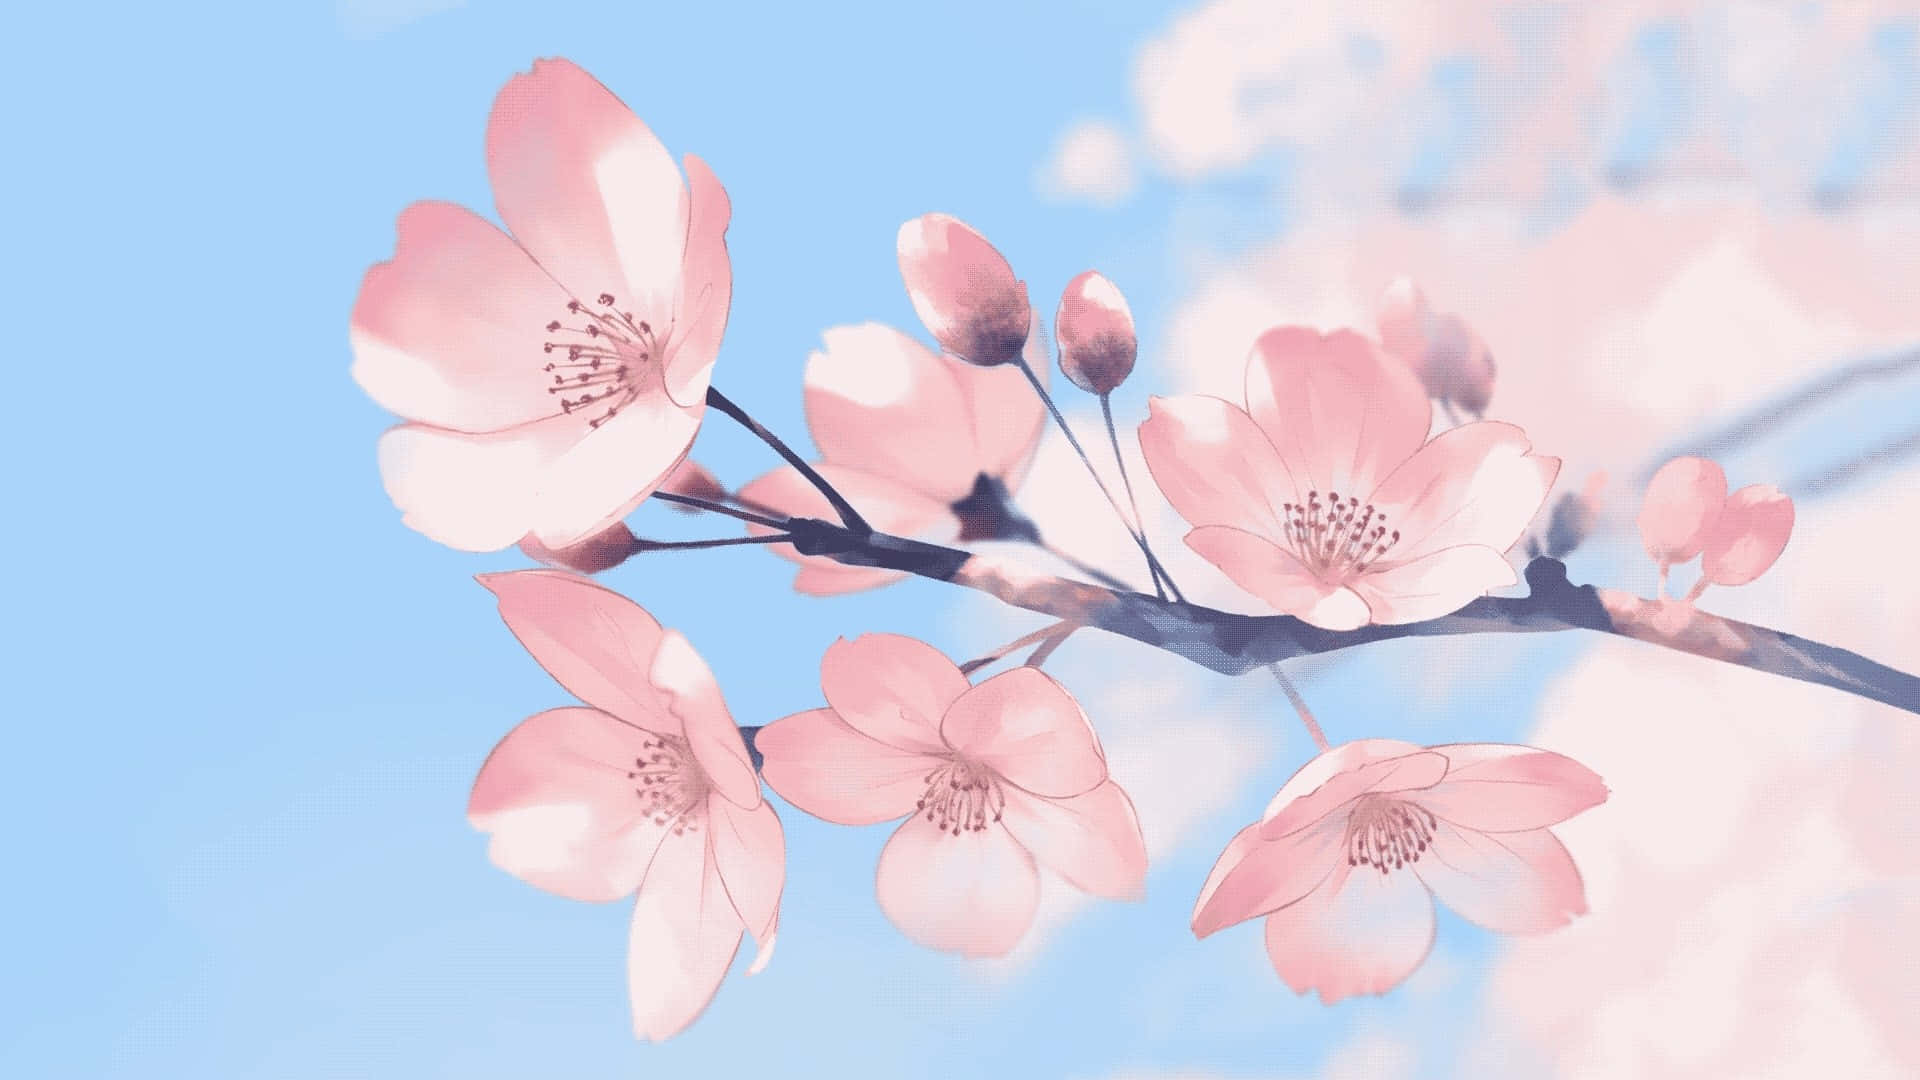 Share Anime Flower Background Latest In Cdgdbentre